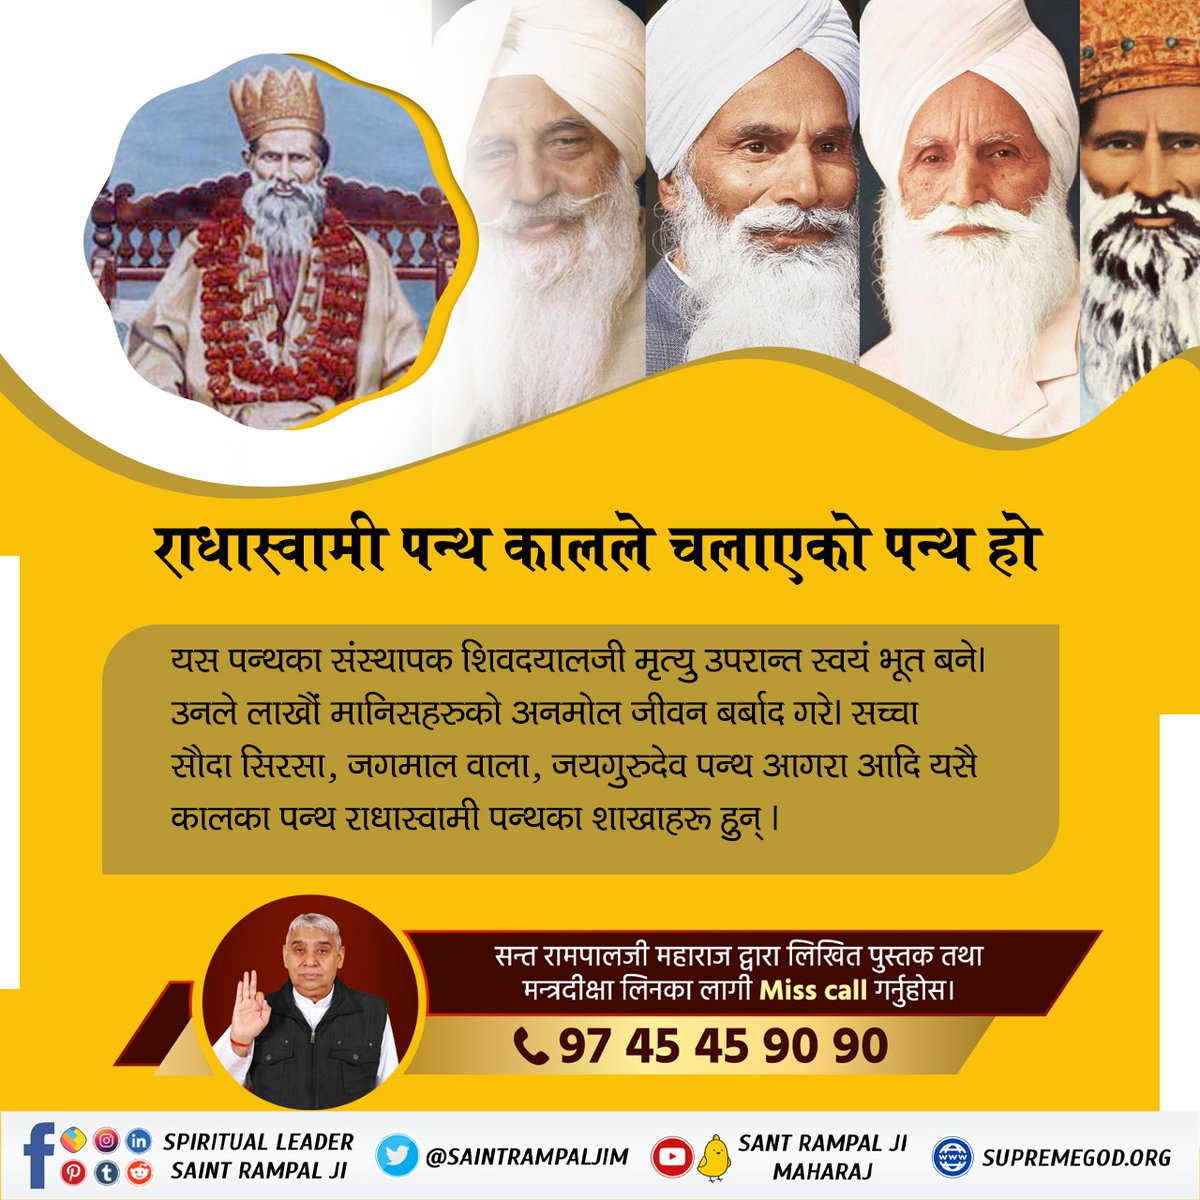 #राधास्वामी_पन्थको_सत्यता
Shivdayalji, the founder of this sect, became a ghost after his death.  He ruined the precious lives of millions of people.  Sacha Sauda Sirsa, Jagmal Wala, Jayagurudev Panth Agra etc. are branches of the Radhaswami Panth, a sect of this period.